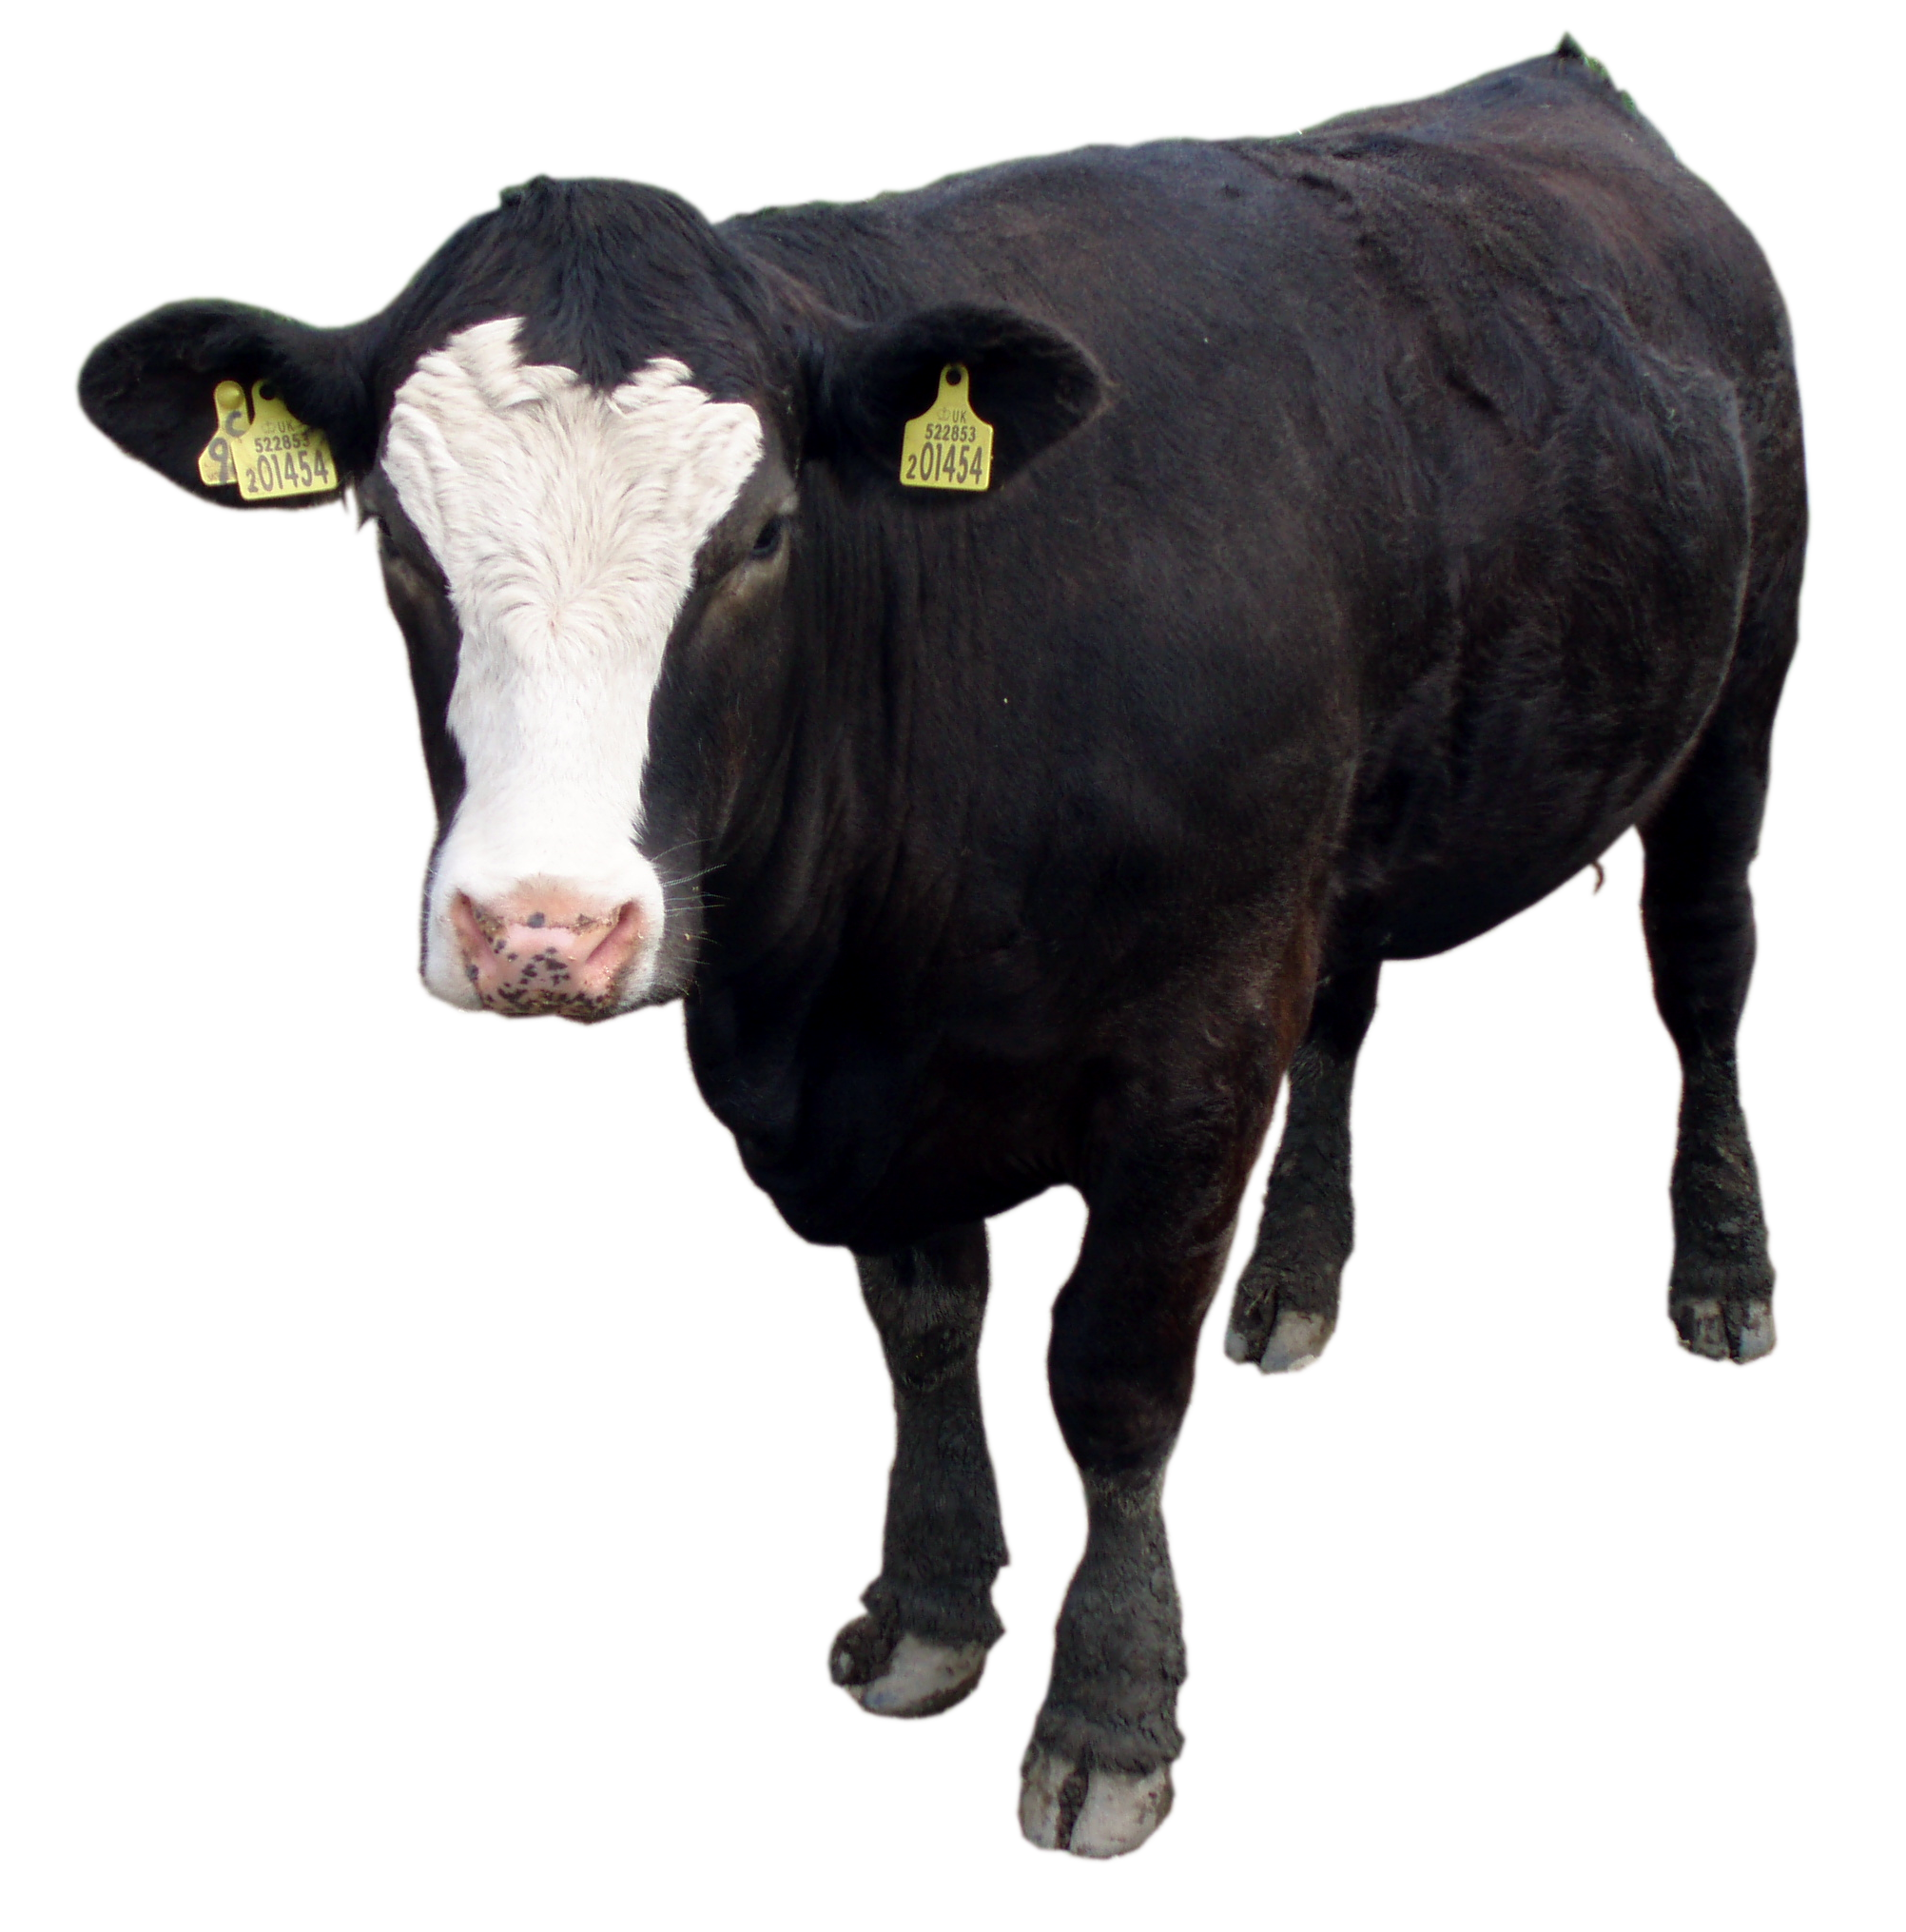 Black Cow PNG images Download image, download picture